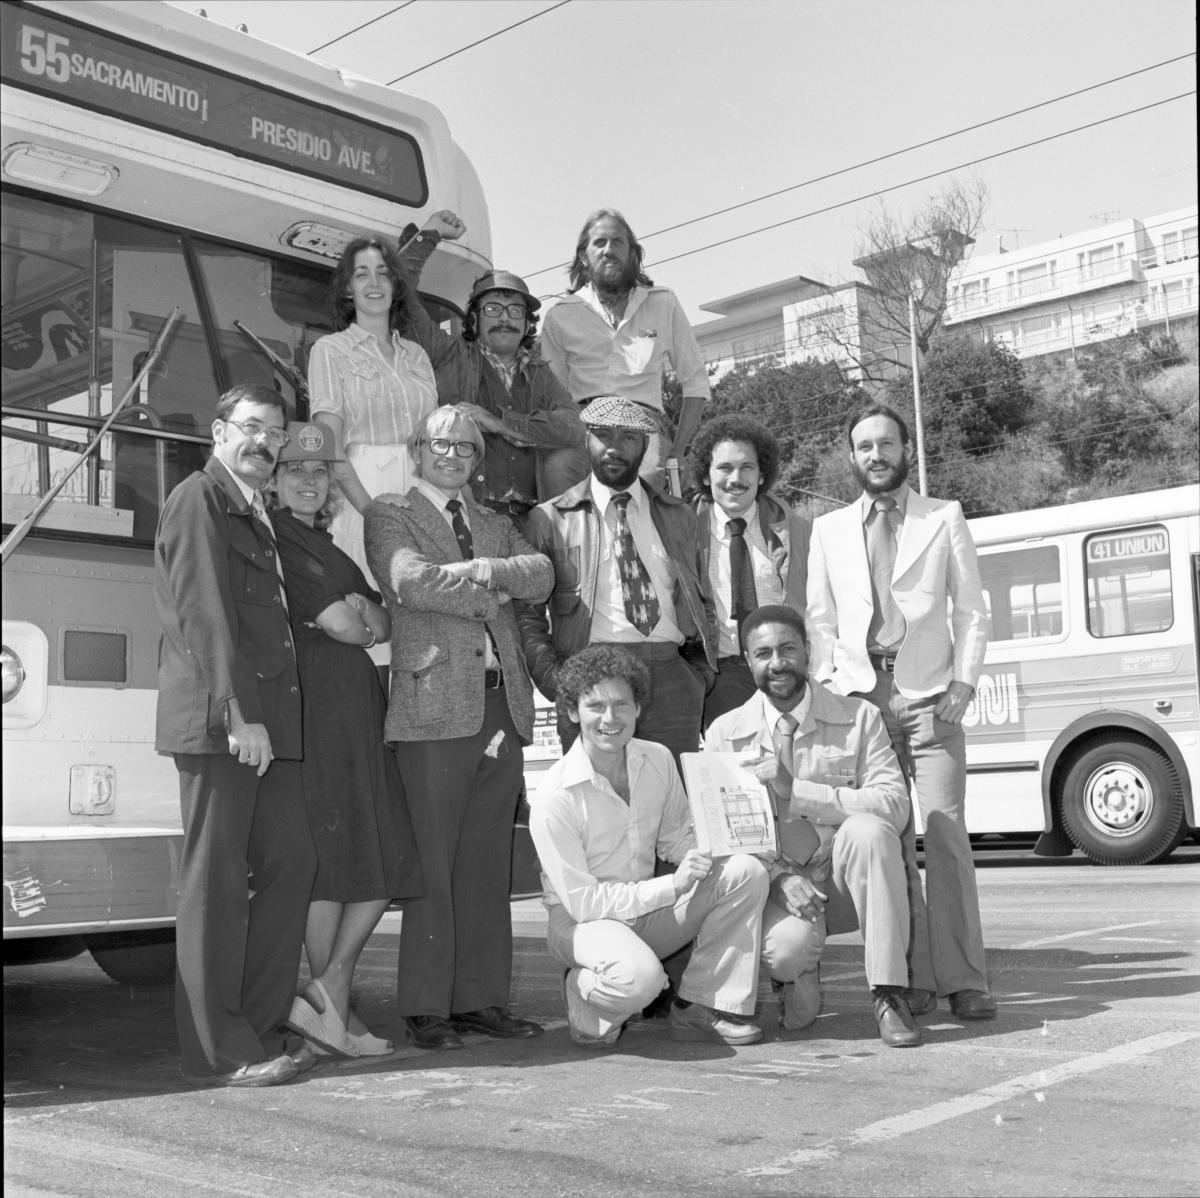 A dozen people dressed in business casual posting for a group photo in front of a bus in what seems to be a bus yard.  They are positioned in several different tiers. 